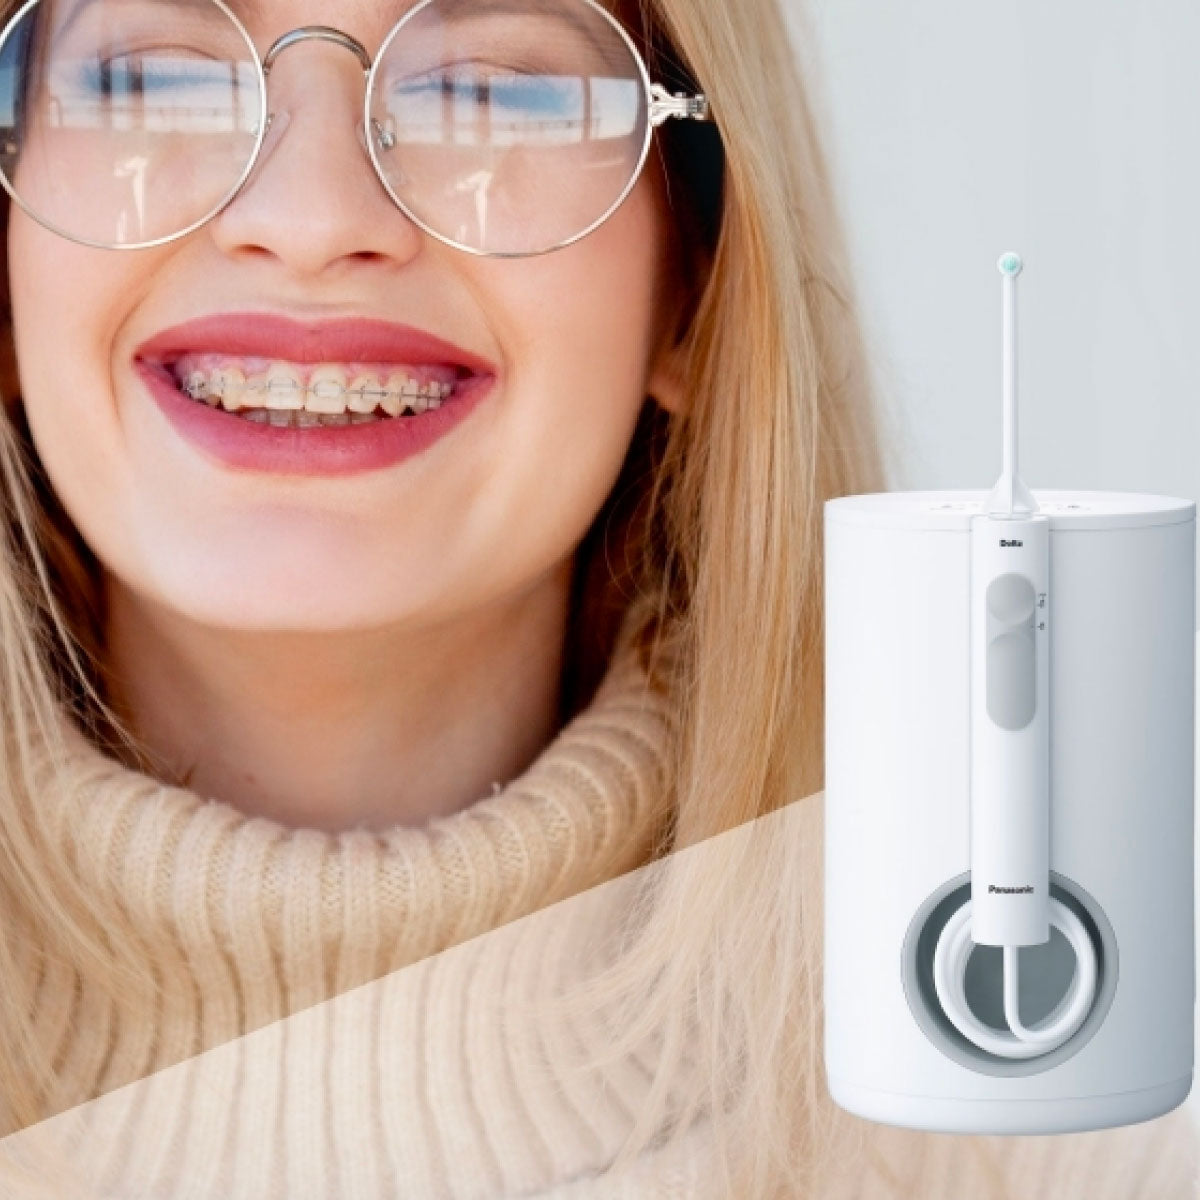 MKS Health Technologies Introduces Panasonic Oral Irrigators for Hassle-Free Every Day Oral Care